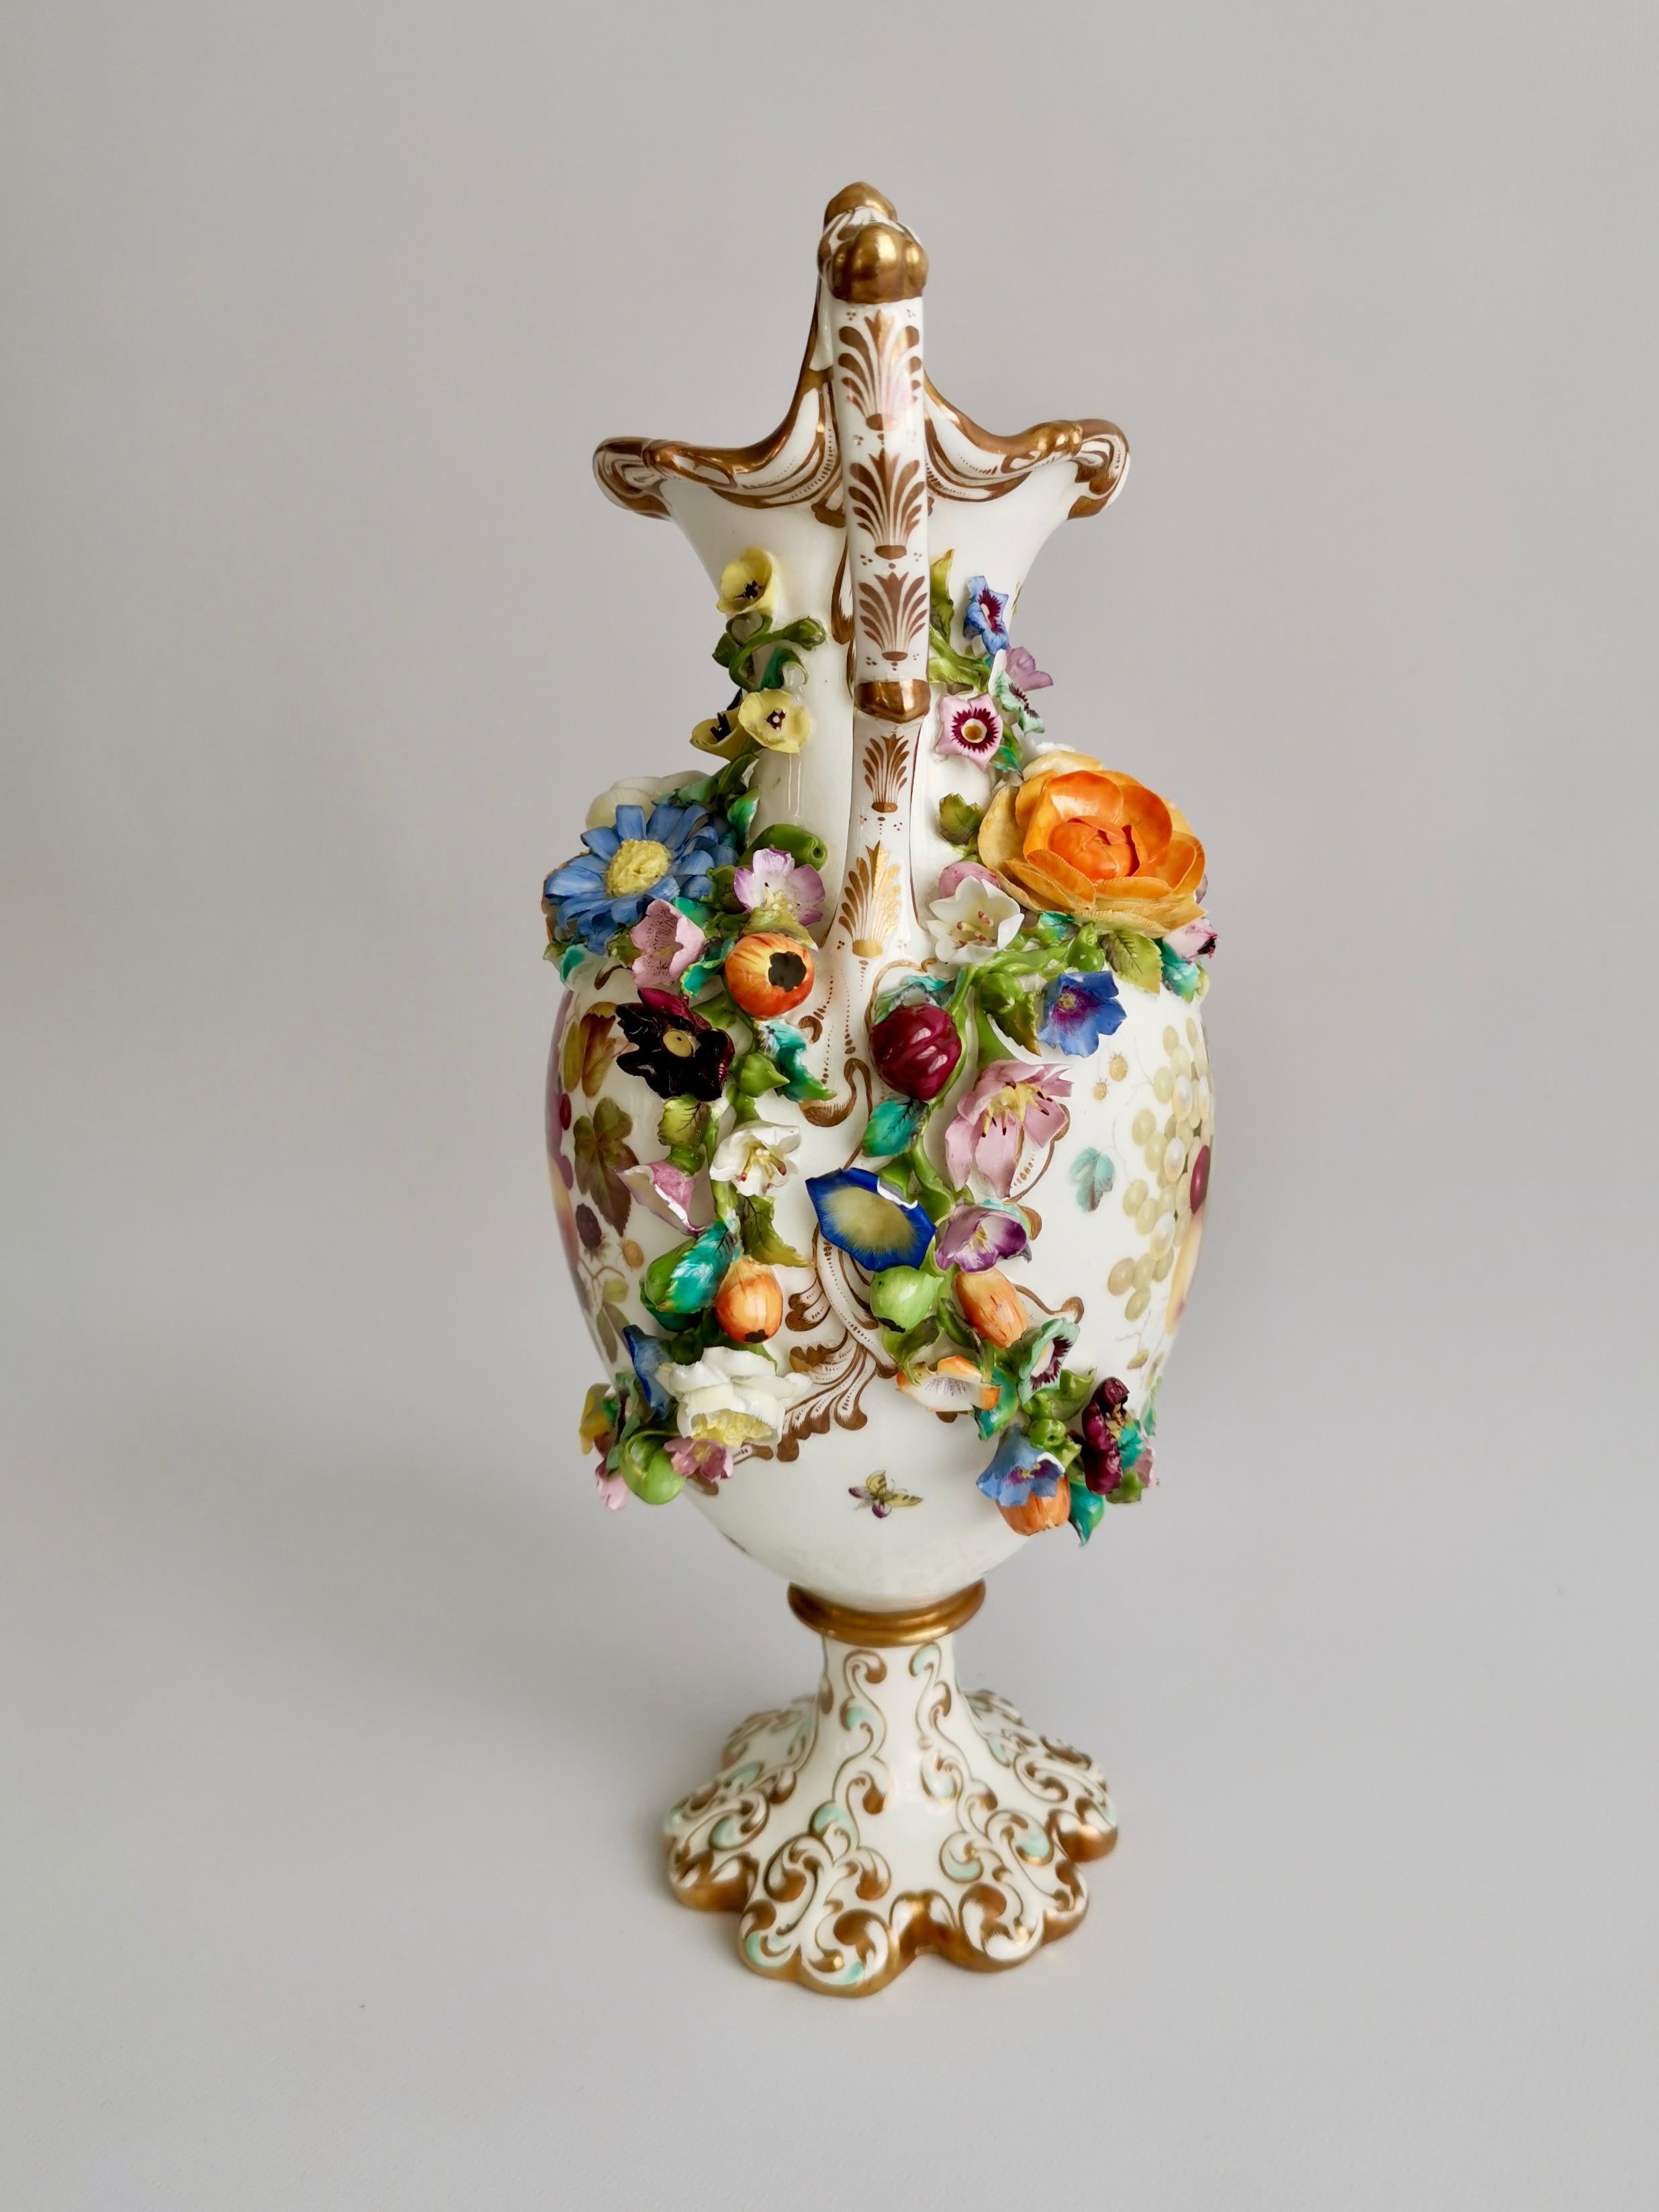 This is a superb porcelain vase made by Minton between 1830 and 1835, which was the Rococo Revival period. The vase is encrusted with fruits and flowers, and painted with sublime fruits by the famous painter Thomas Steel. 

Minton was one of the